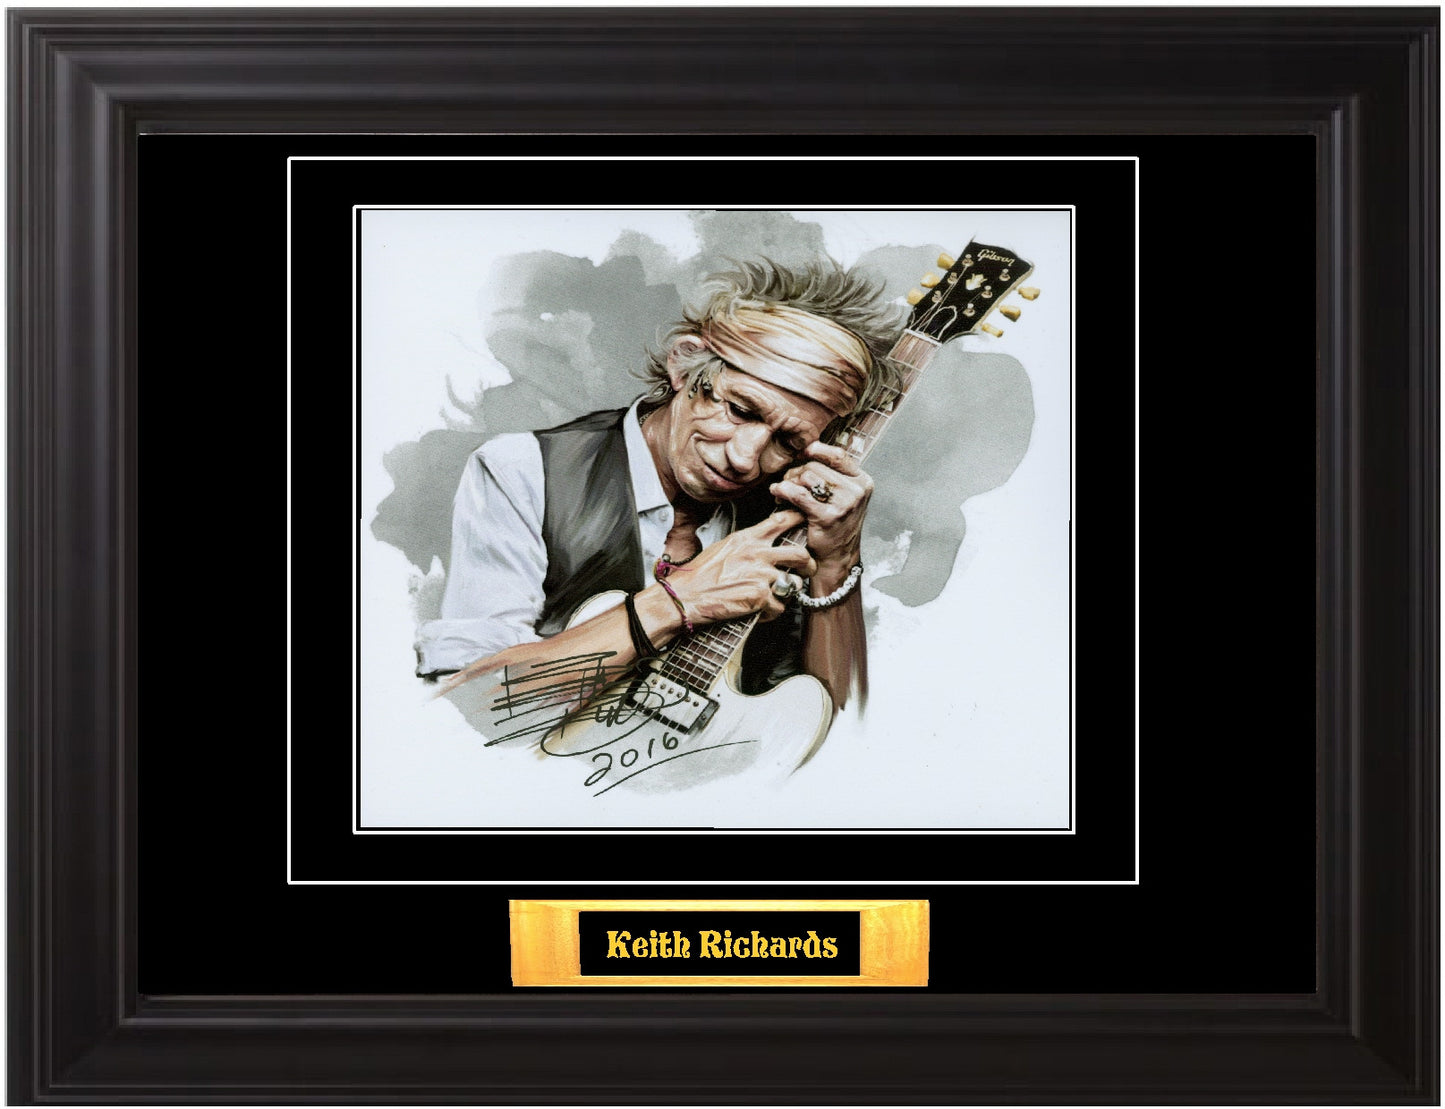 Keith Richards Autographed Photo - Zion Graphic Collectibles